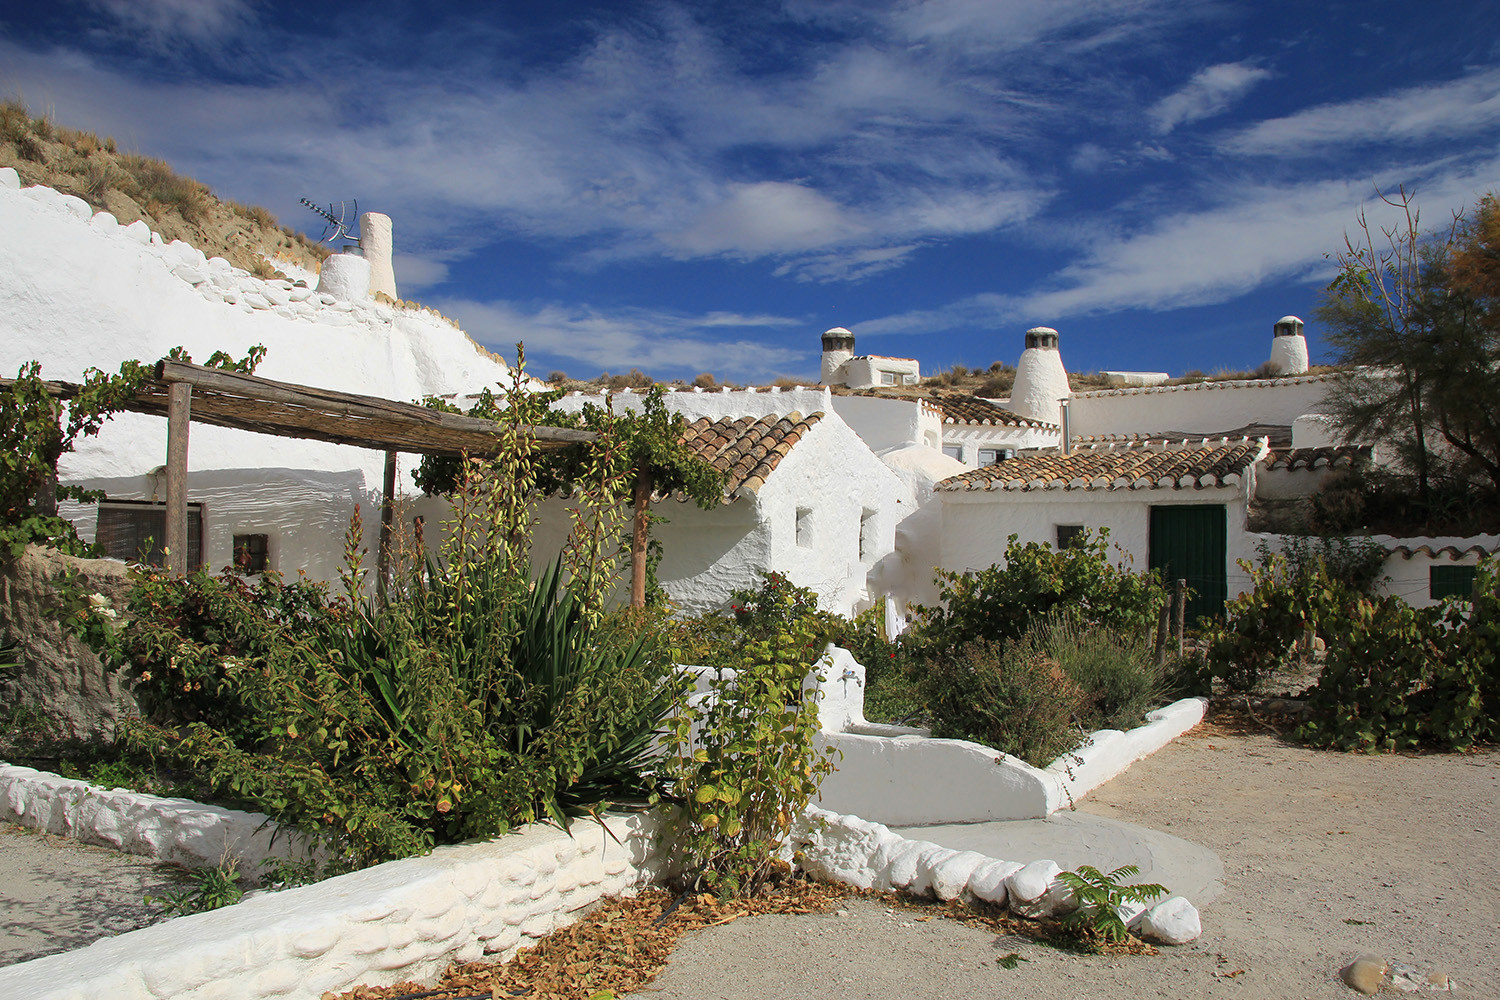 The cave houses